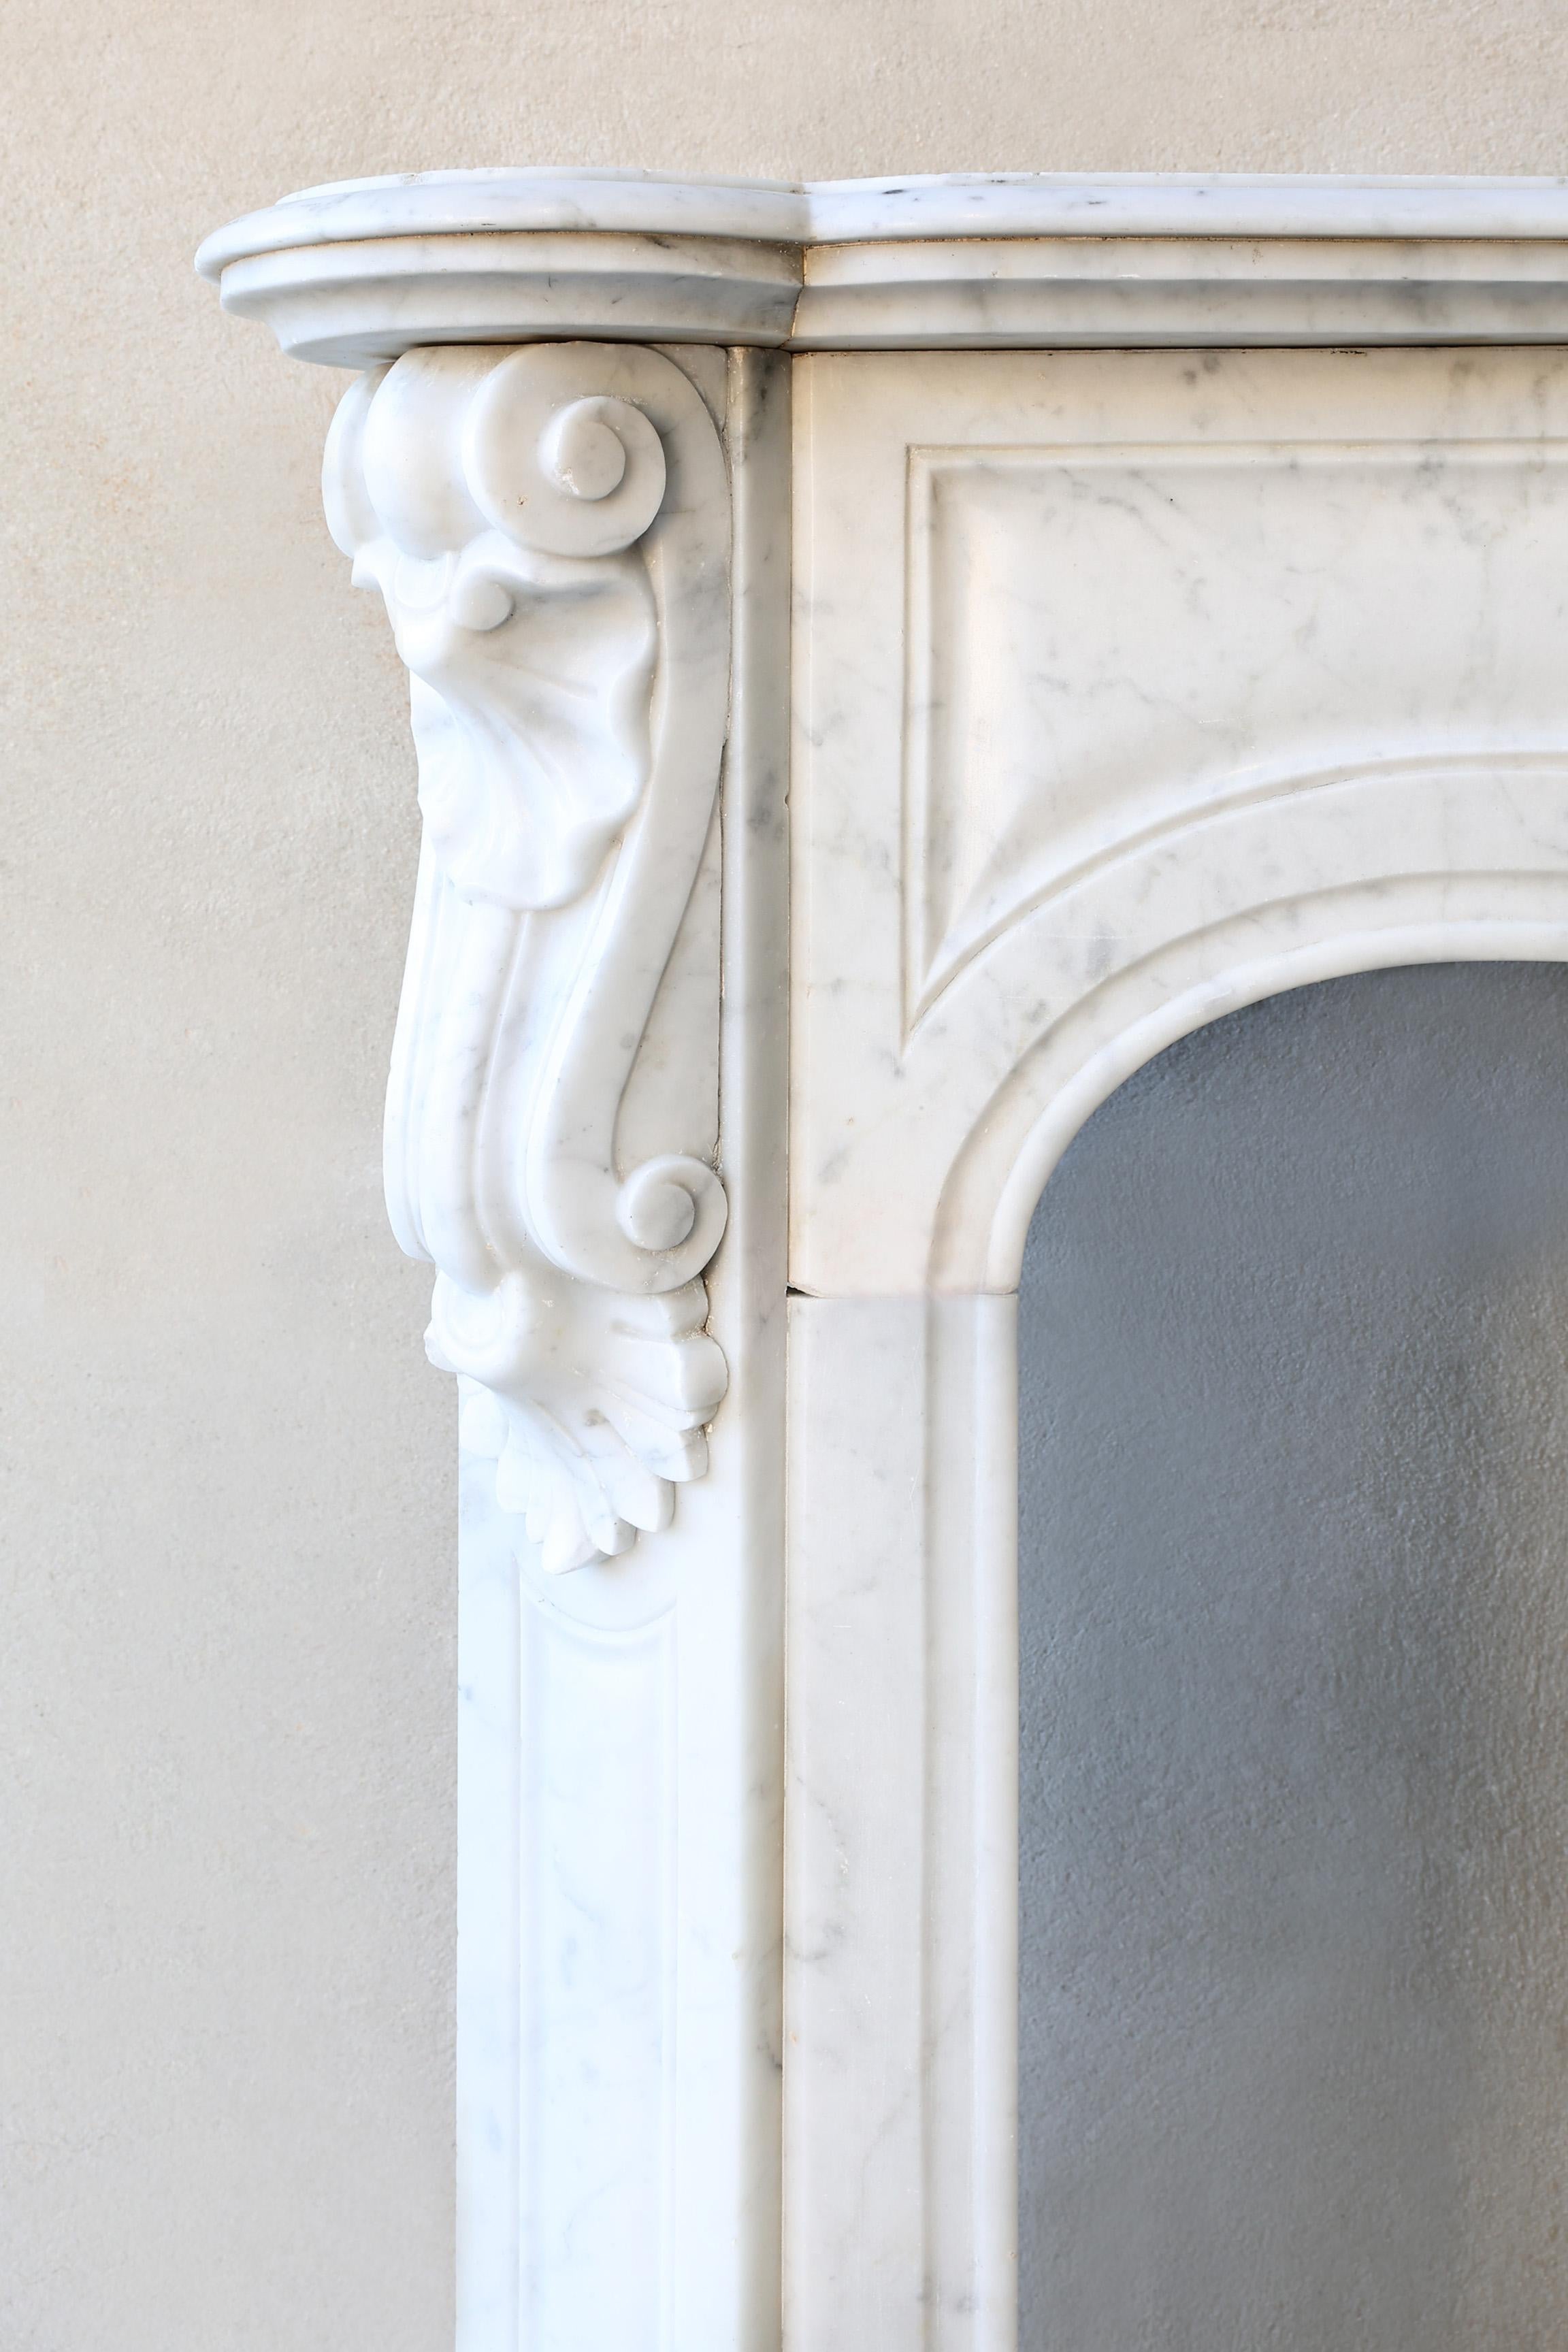 Carrara Marble Fireplace in the Style of Pompadour from the 19th Century For Sale 5